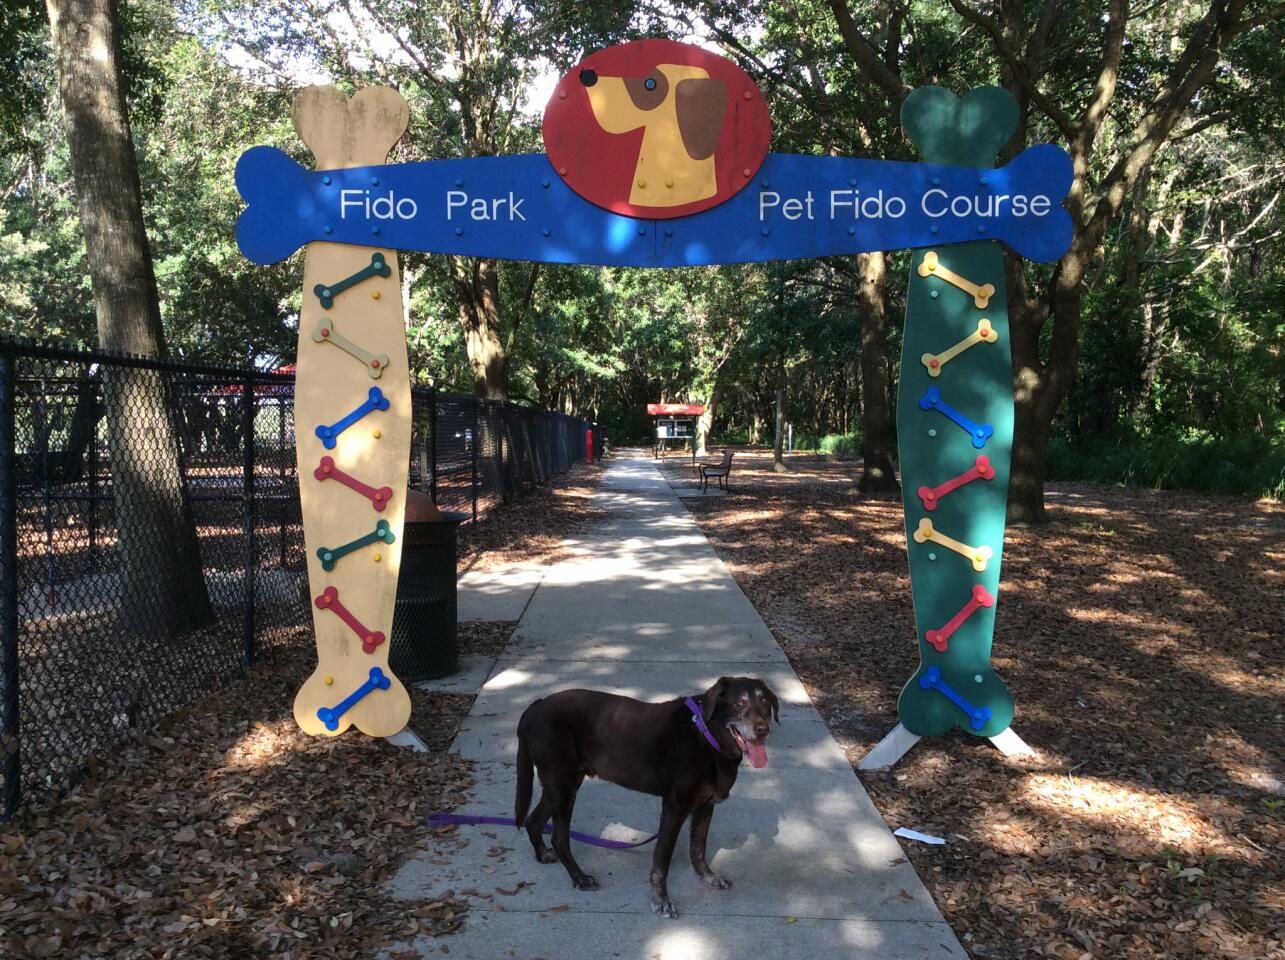 Adventures await at West Orange Dog Park in Winter Garden, which features plenty of shade, room to run, benches and tables plus toys to borrow. Buddy, a 13-year-old Labrador retriever, is a longtime patron.